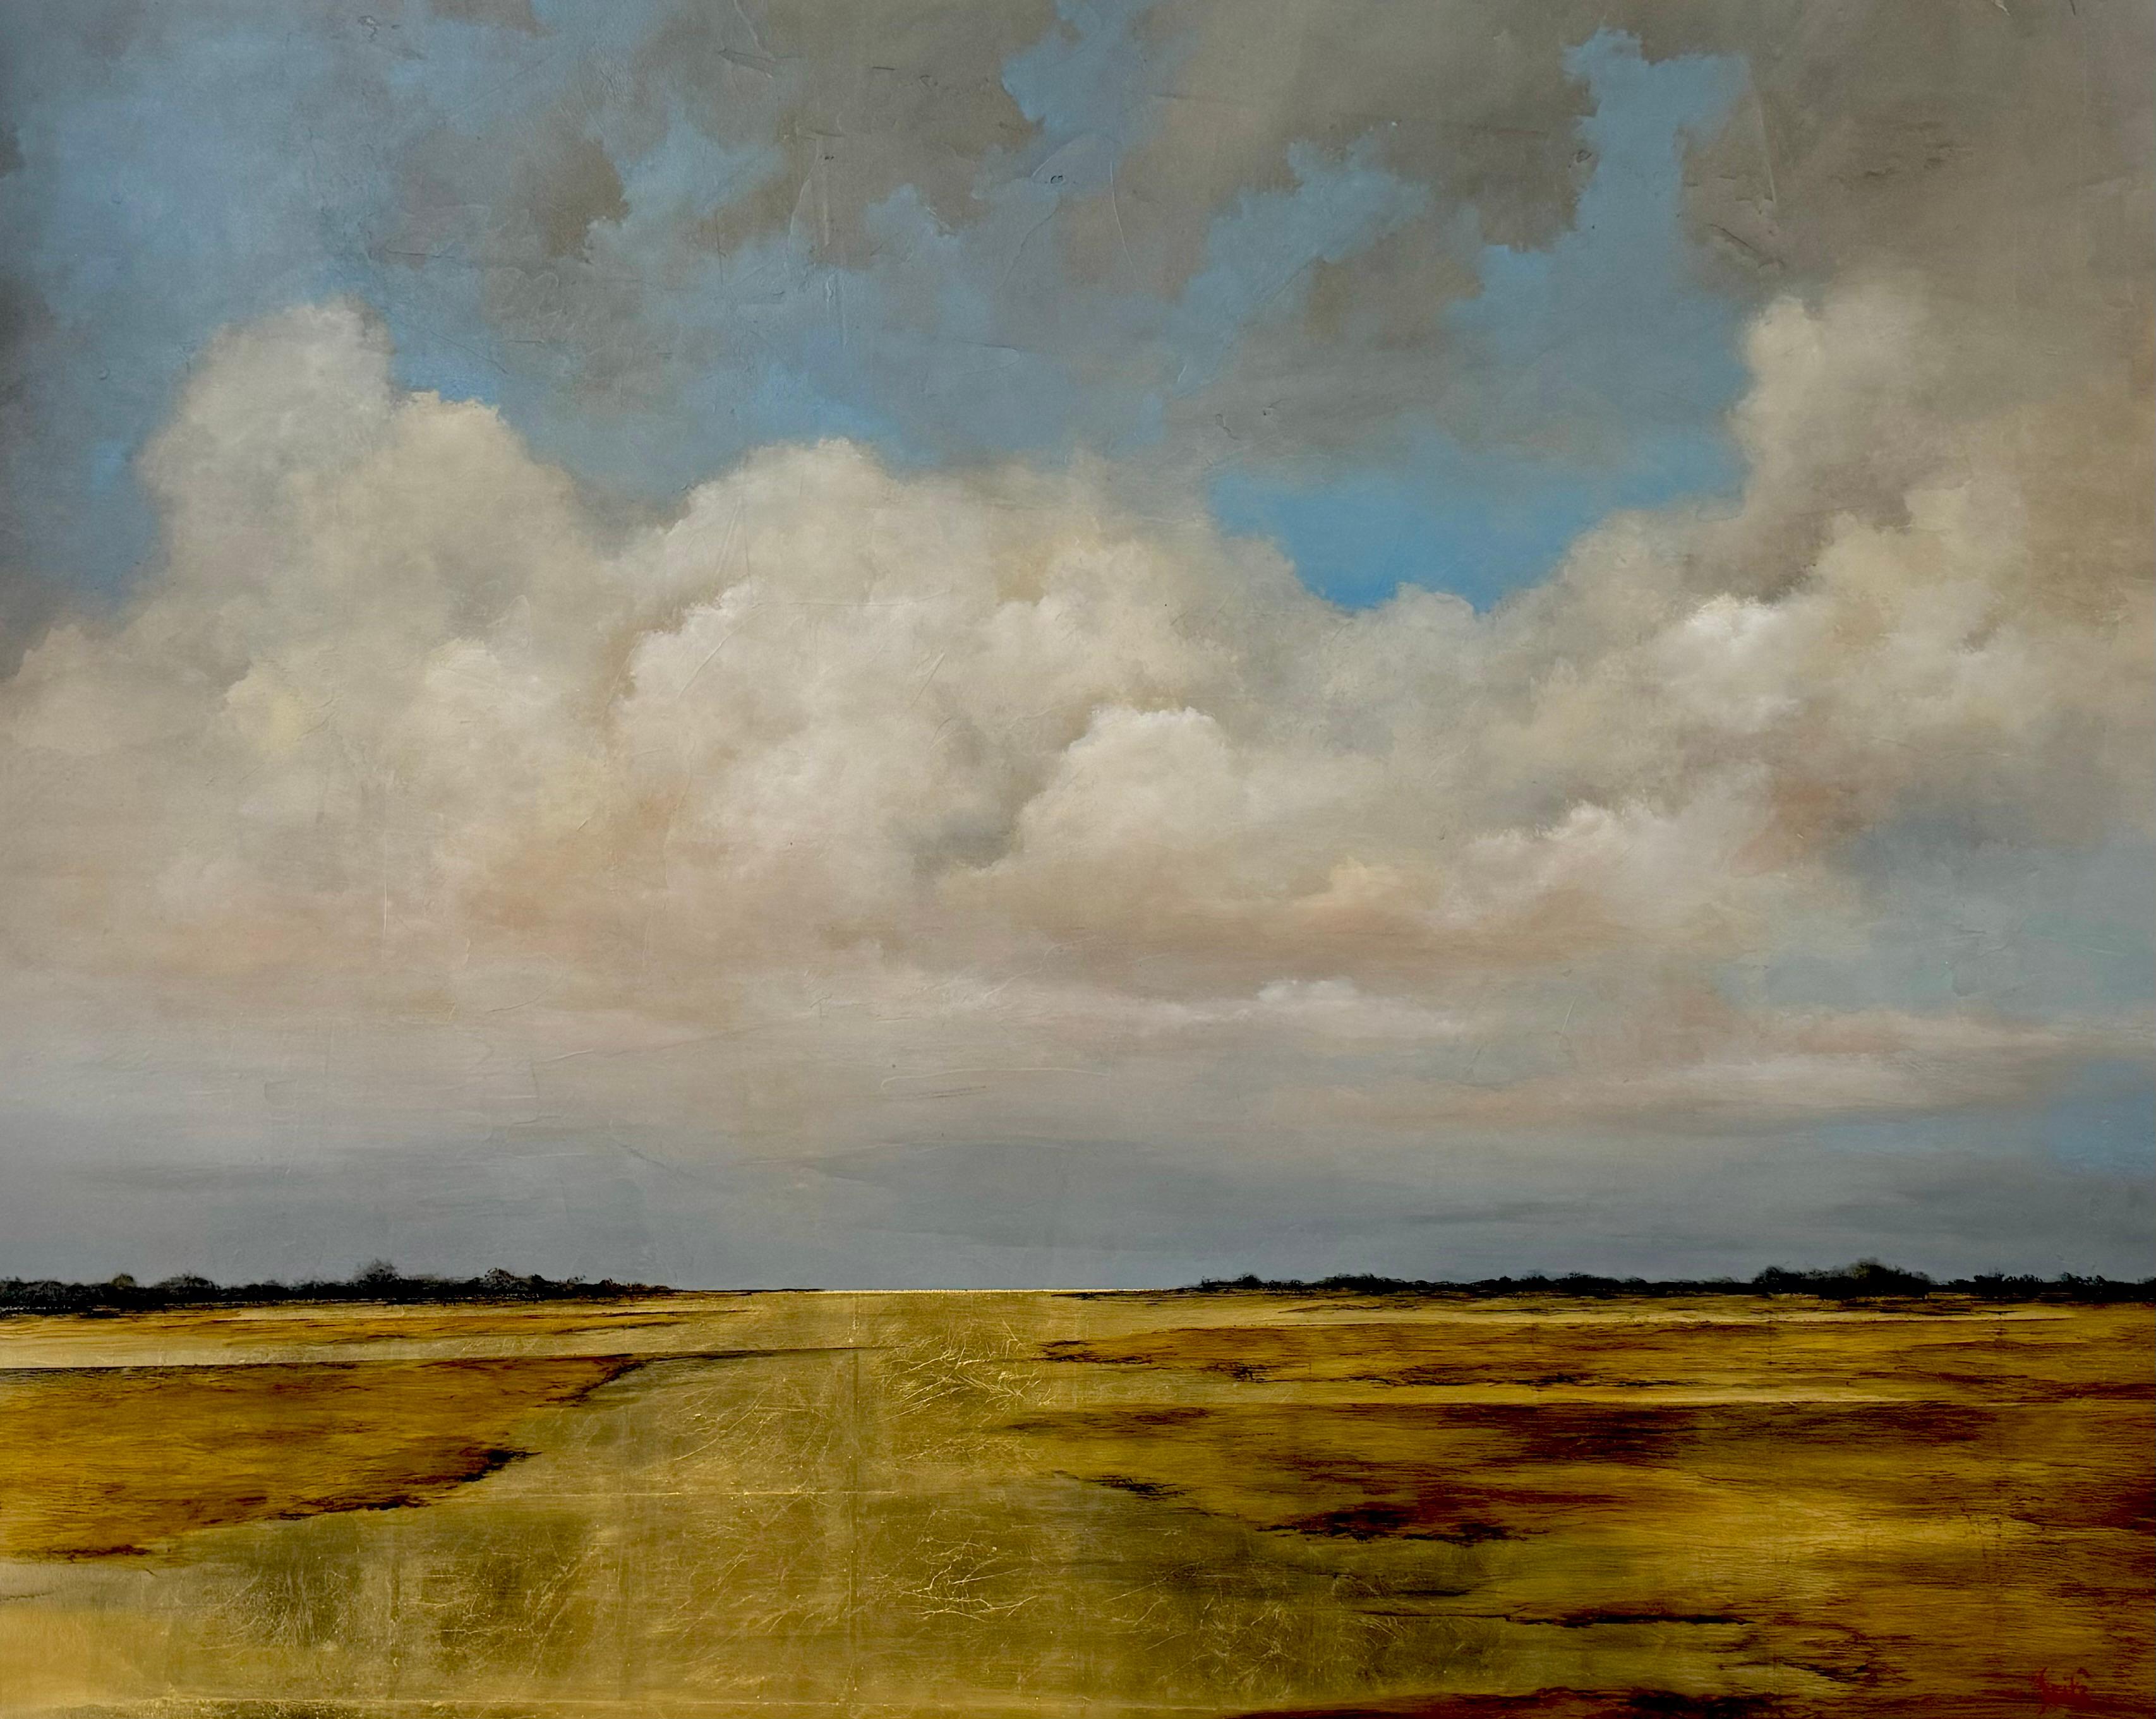 'From Here to There' is a large acrylic and gold leaf on canvas landscape painting of horizontal format created by American artist Jim Seitz in 2023. Featuring a gold, grey, peach and blue palette, the painting gives great importance to the sky and